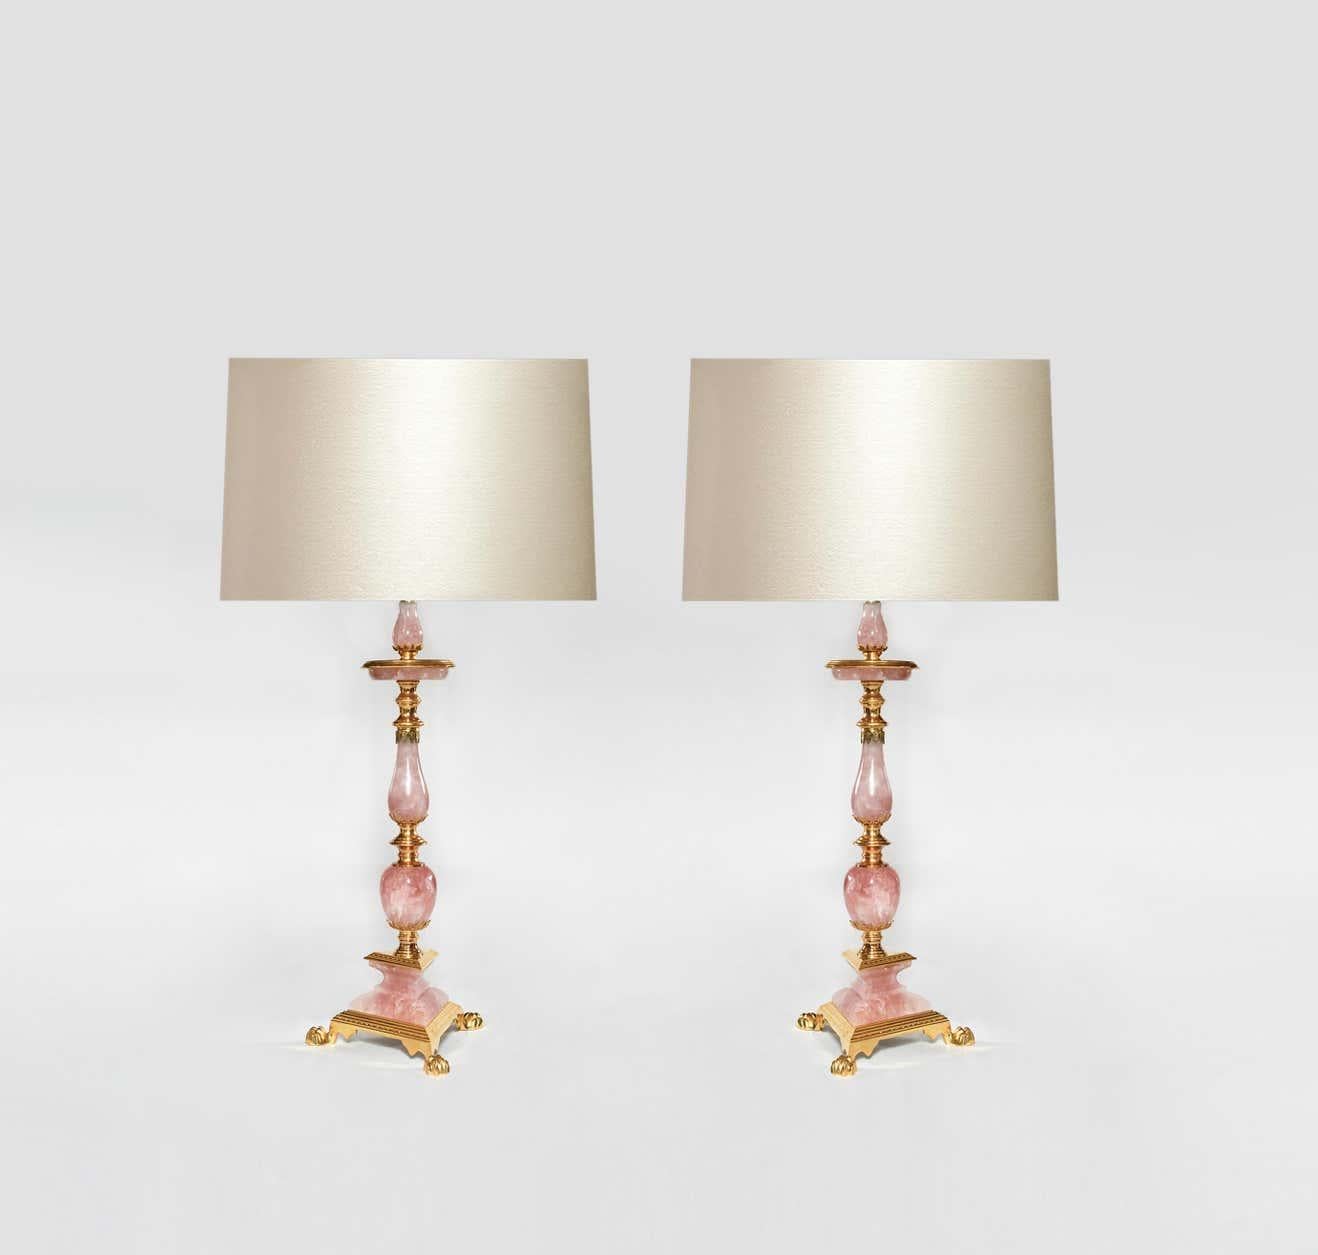 Pair of fine cast ormolu-mounted rose rock crystal quartz lamps.
Available in a nickel plating and antique brass finished.
To the rock crystal: 20